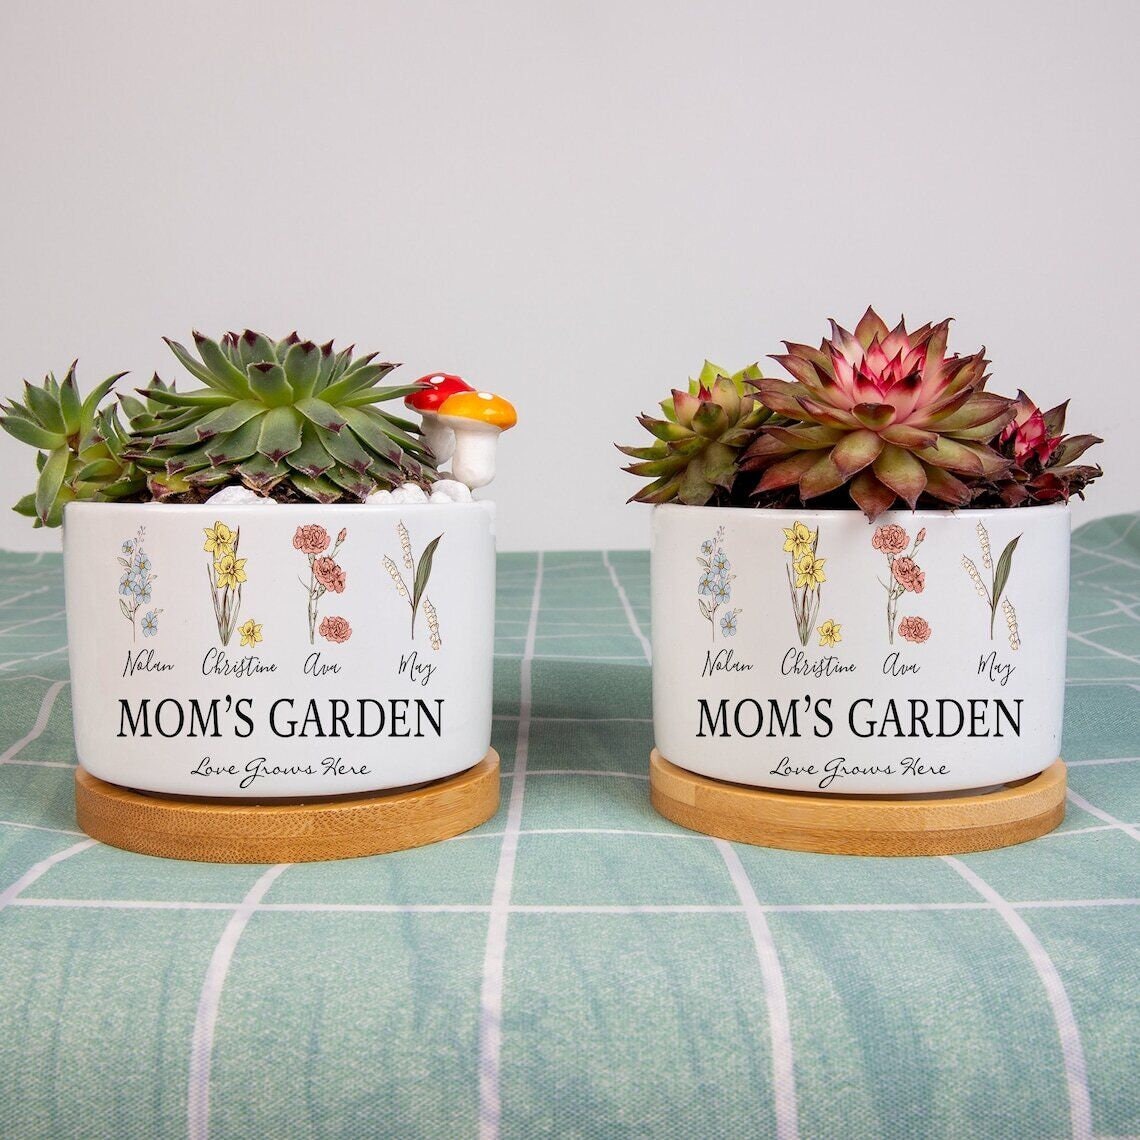 Simple Mother's Day gift ideas for grandma: Flower pot & photo flowers - Mom  Endeavors